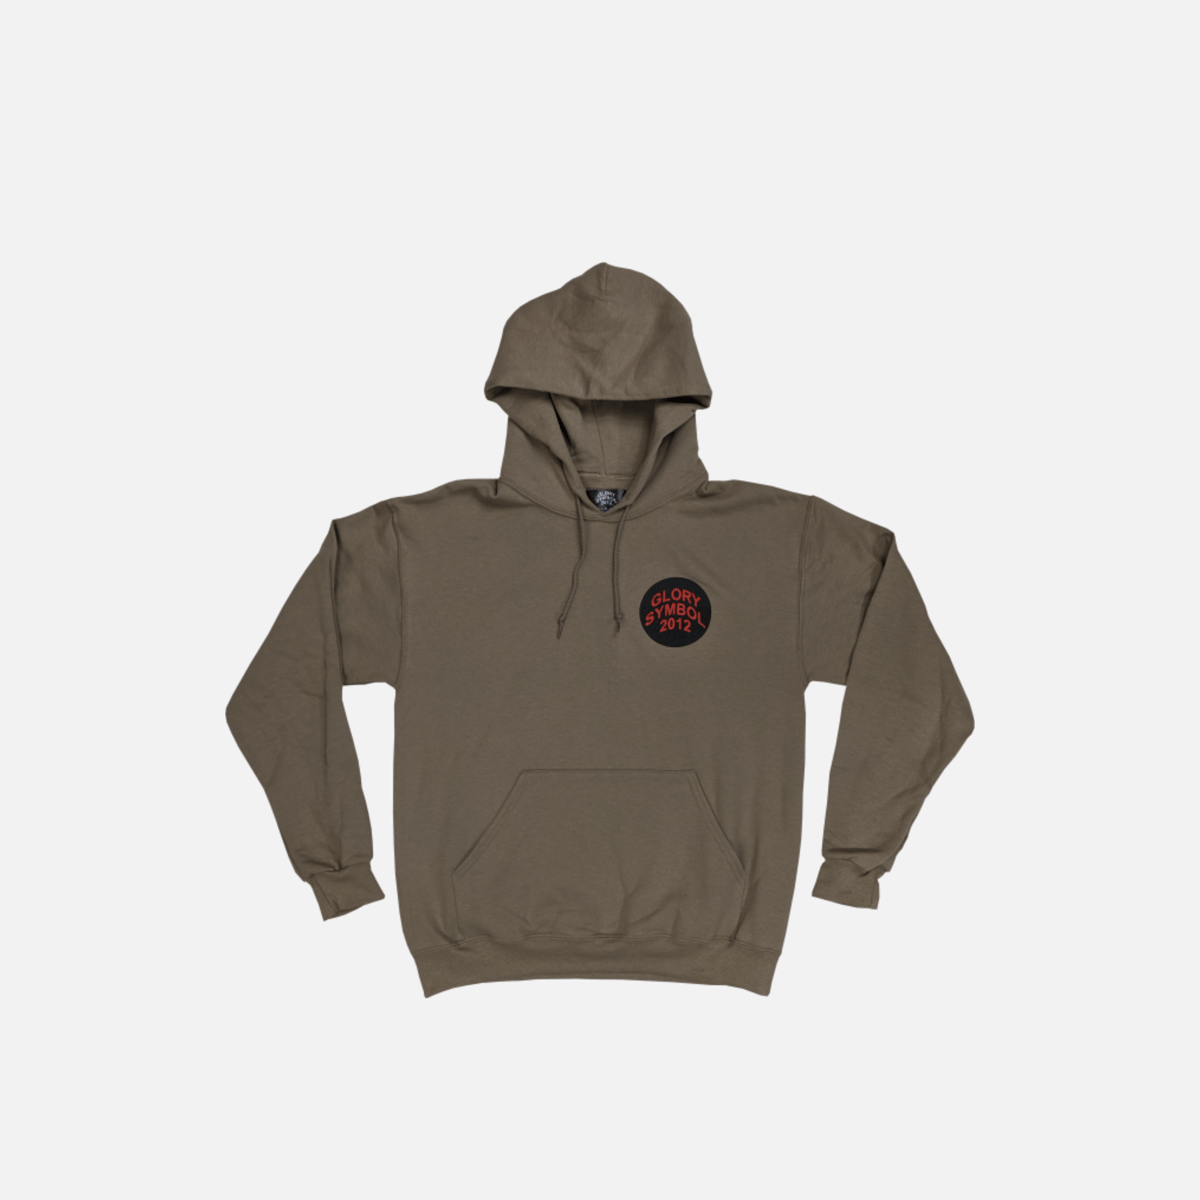 Image of OLD E LOGO HOODIE - BEIGE PULLOVER